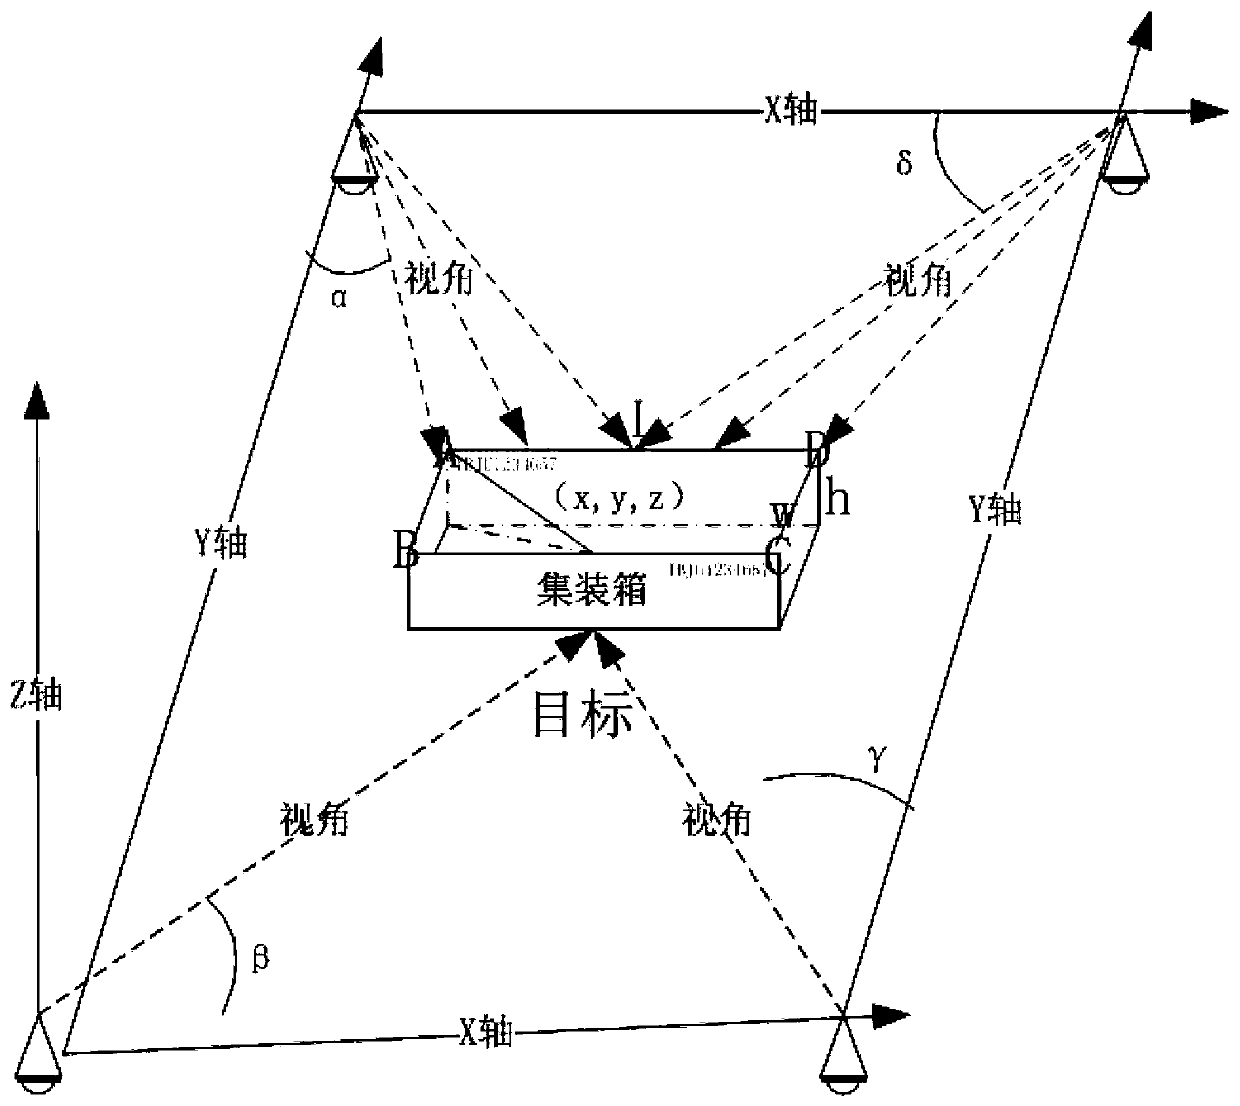 Method for identifying container number by rail-mounted gantry crane